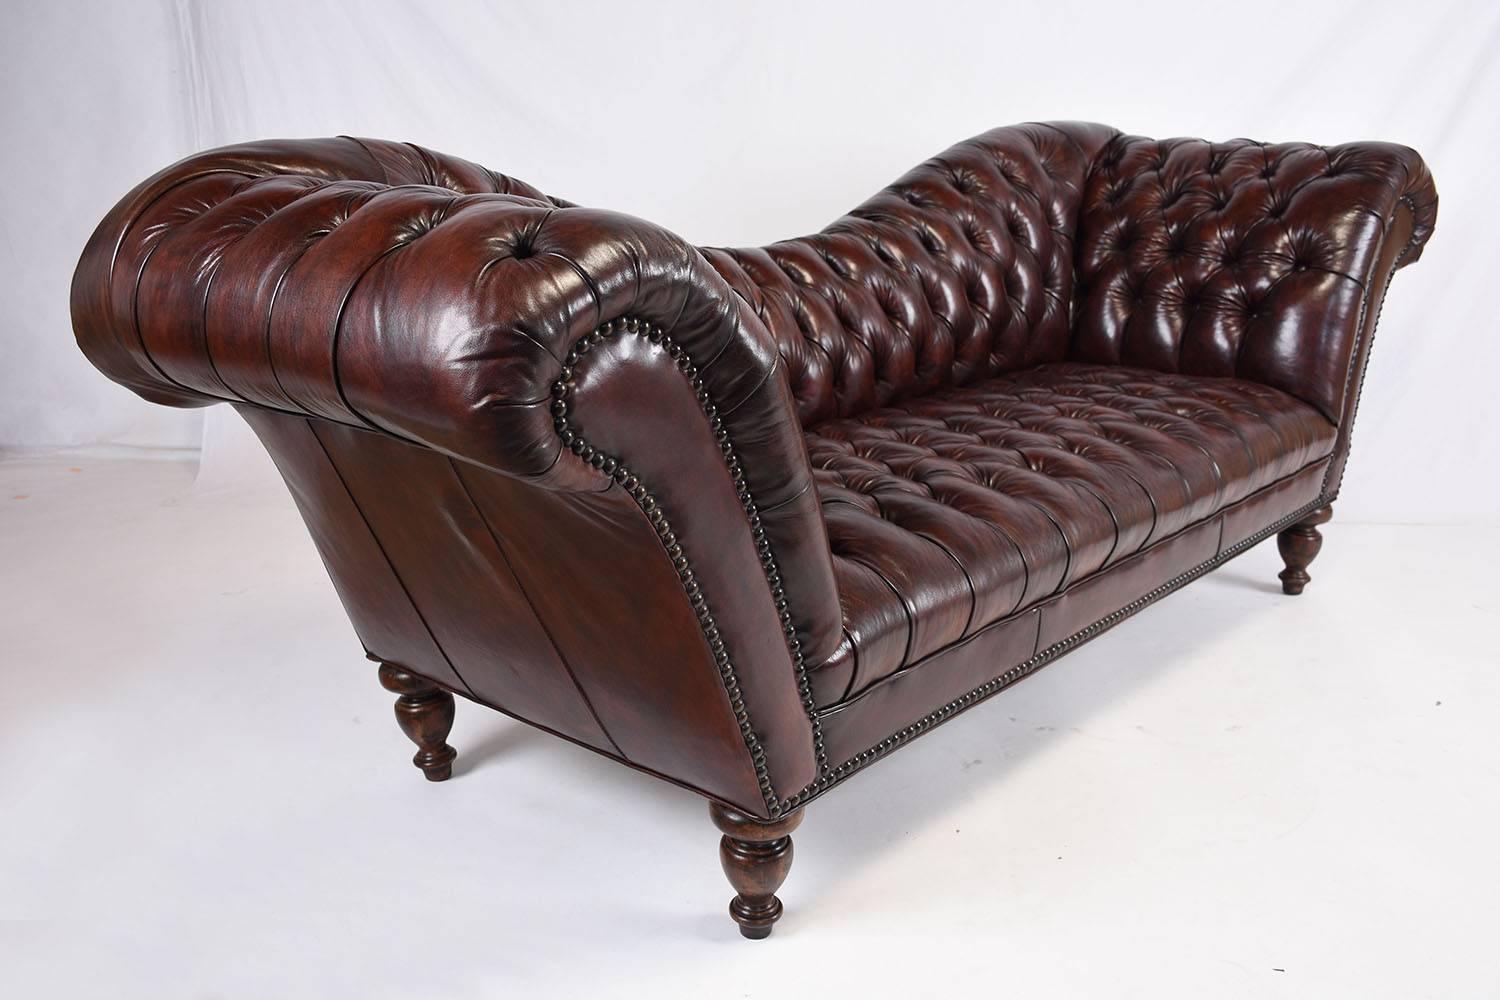 This 1970s vintage Hollywood Regency-style chesterfield sofa features a uniquely shaped swayed seat back. This comfortable sofa is upholstered in a dark brown colored leather on all sides of the sofa. The leather is adorned with tufted details on